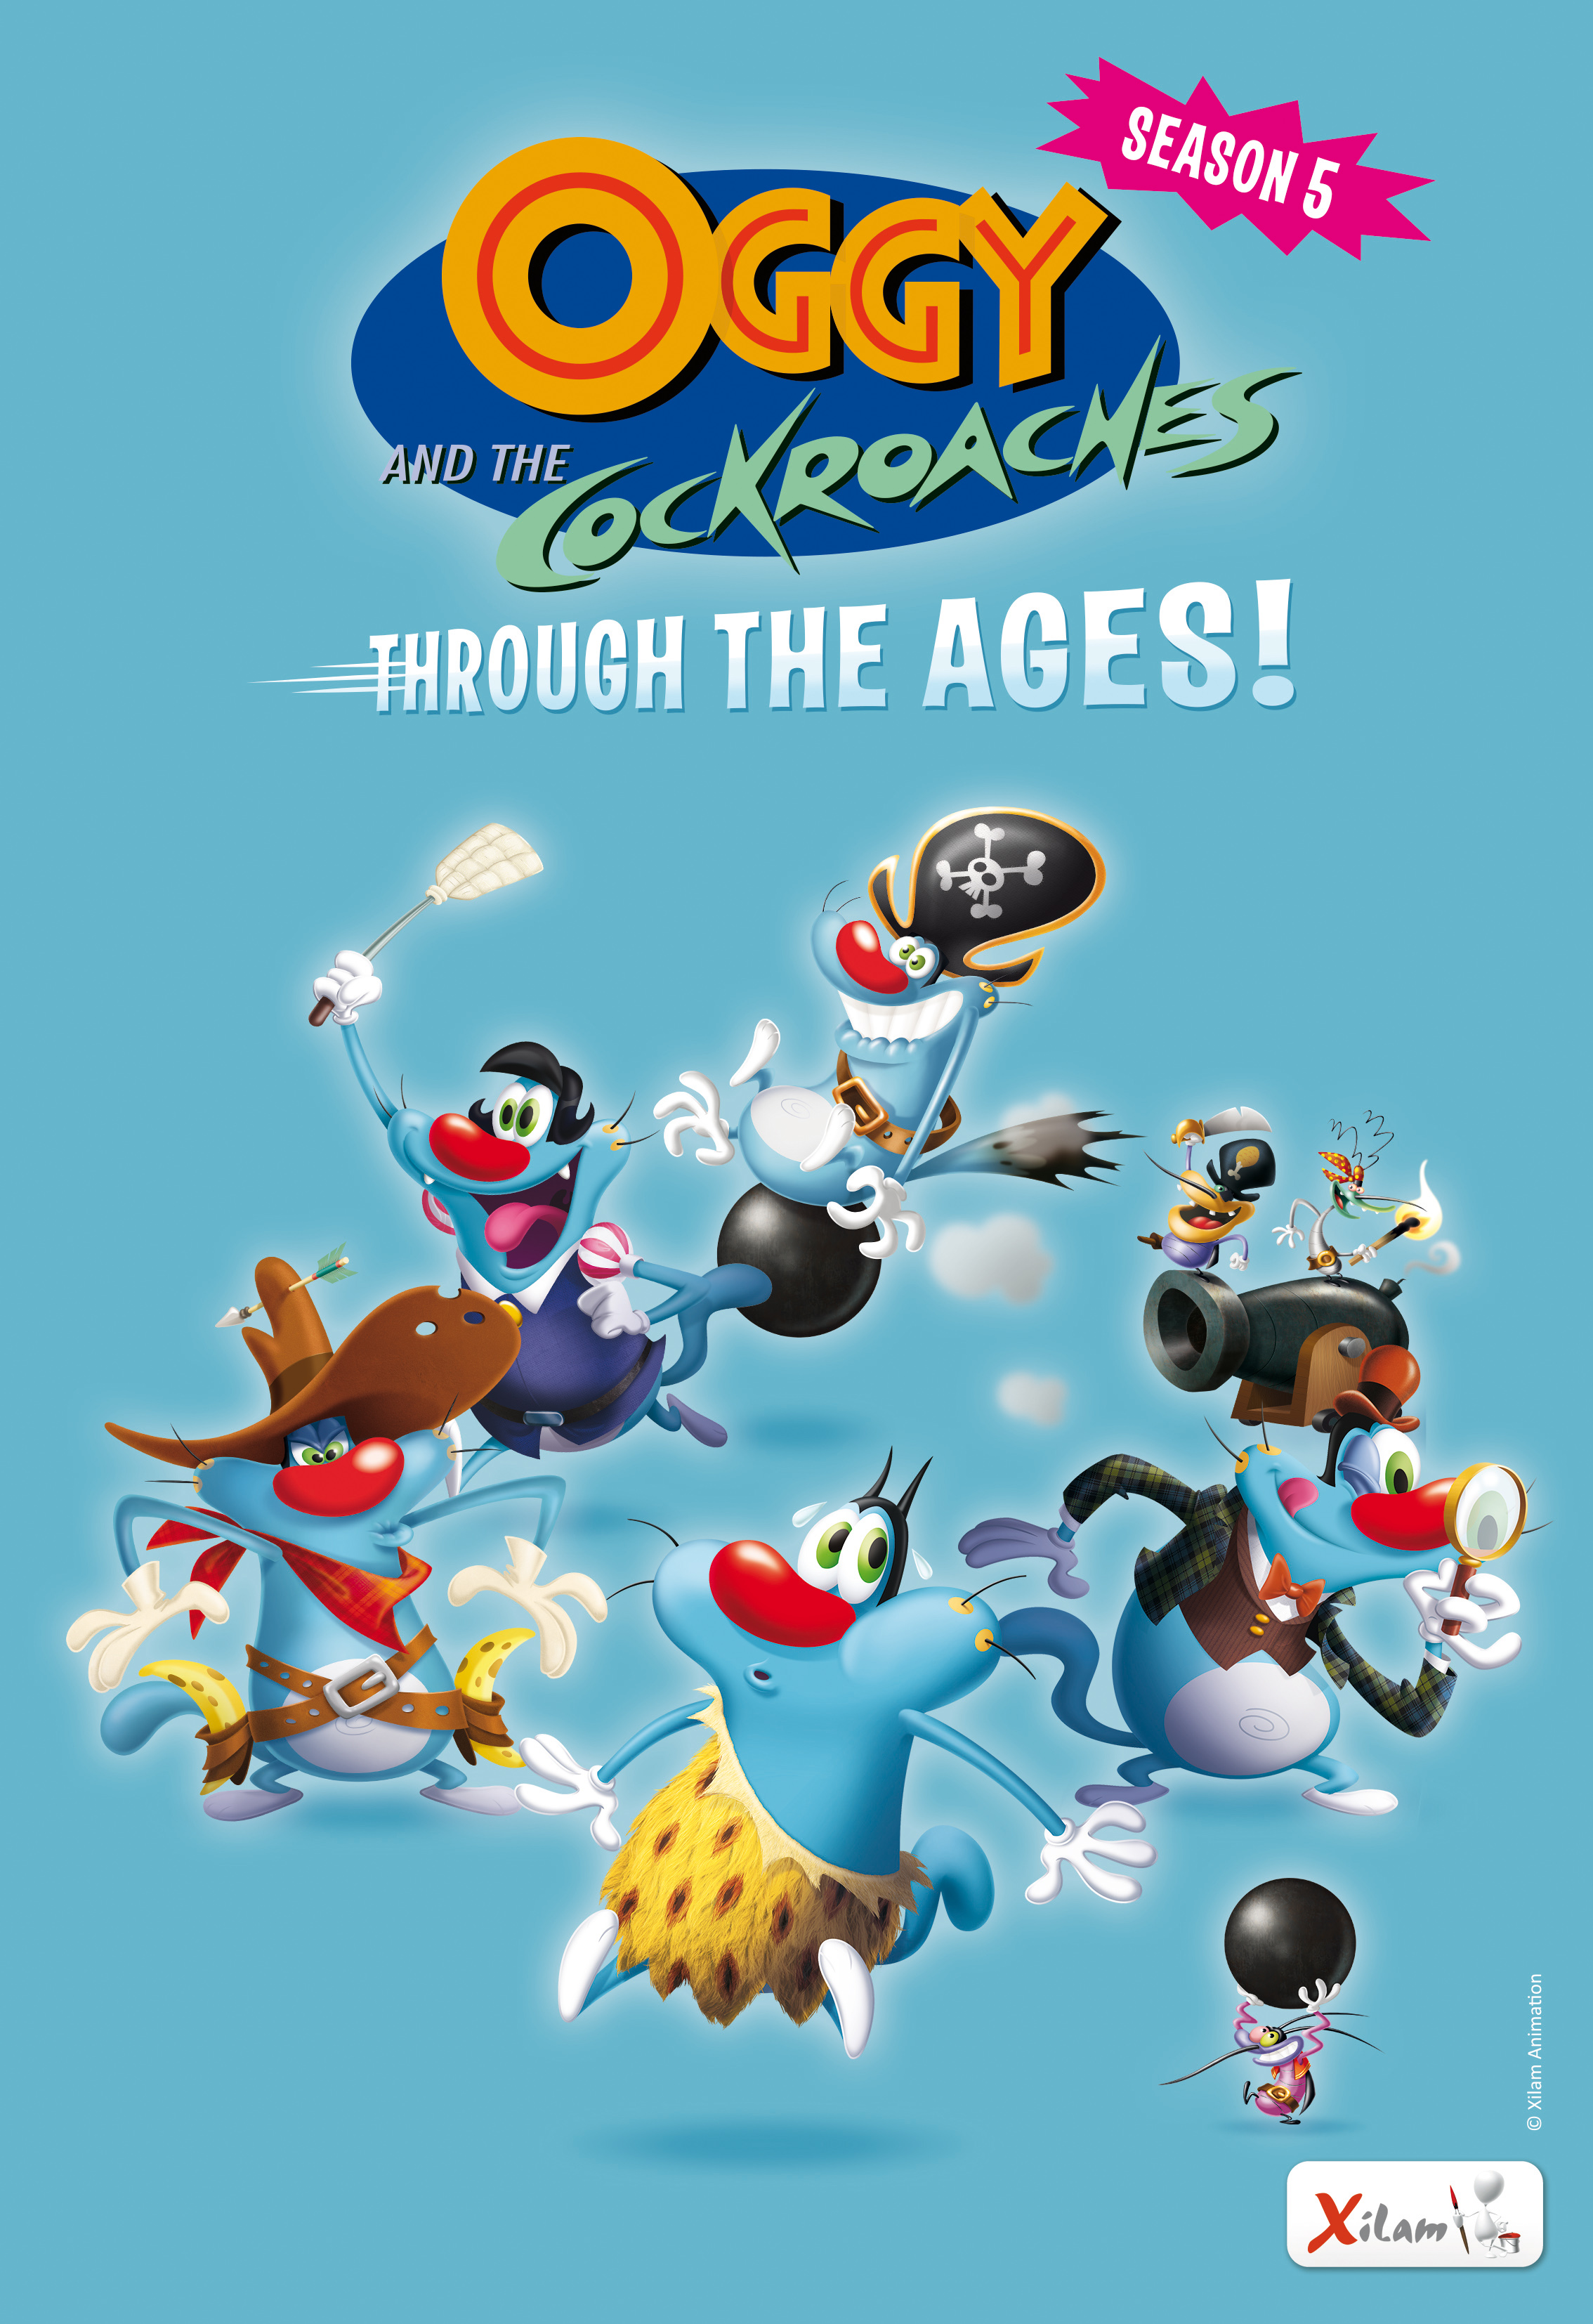 oggy games and the cockroaches